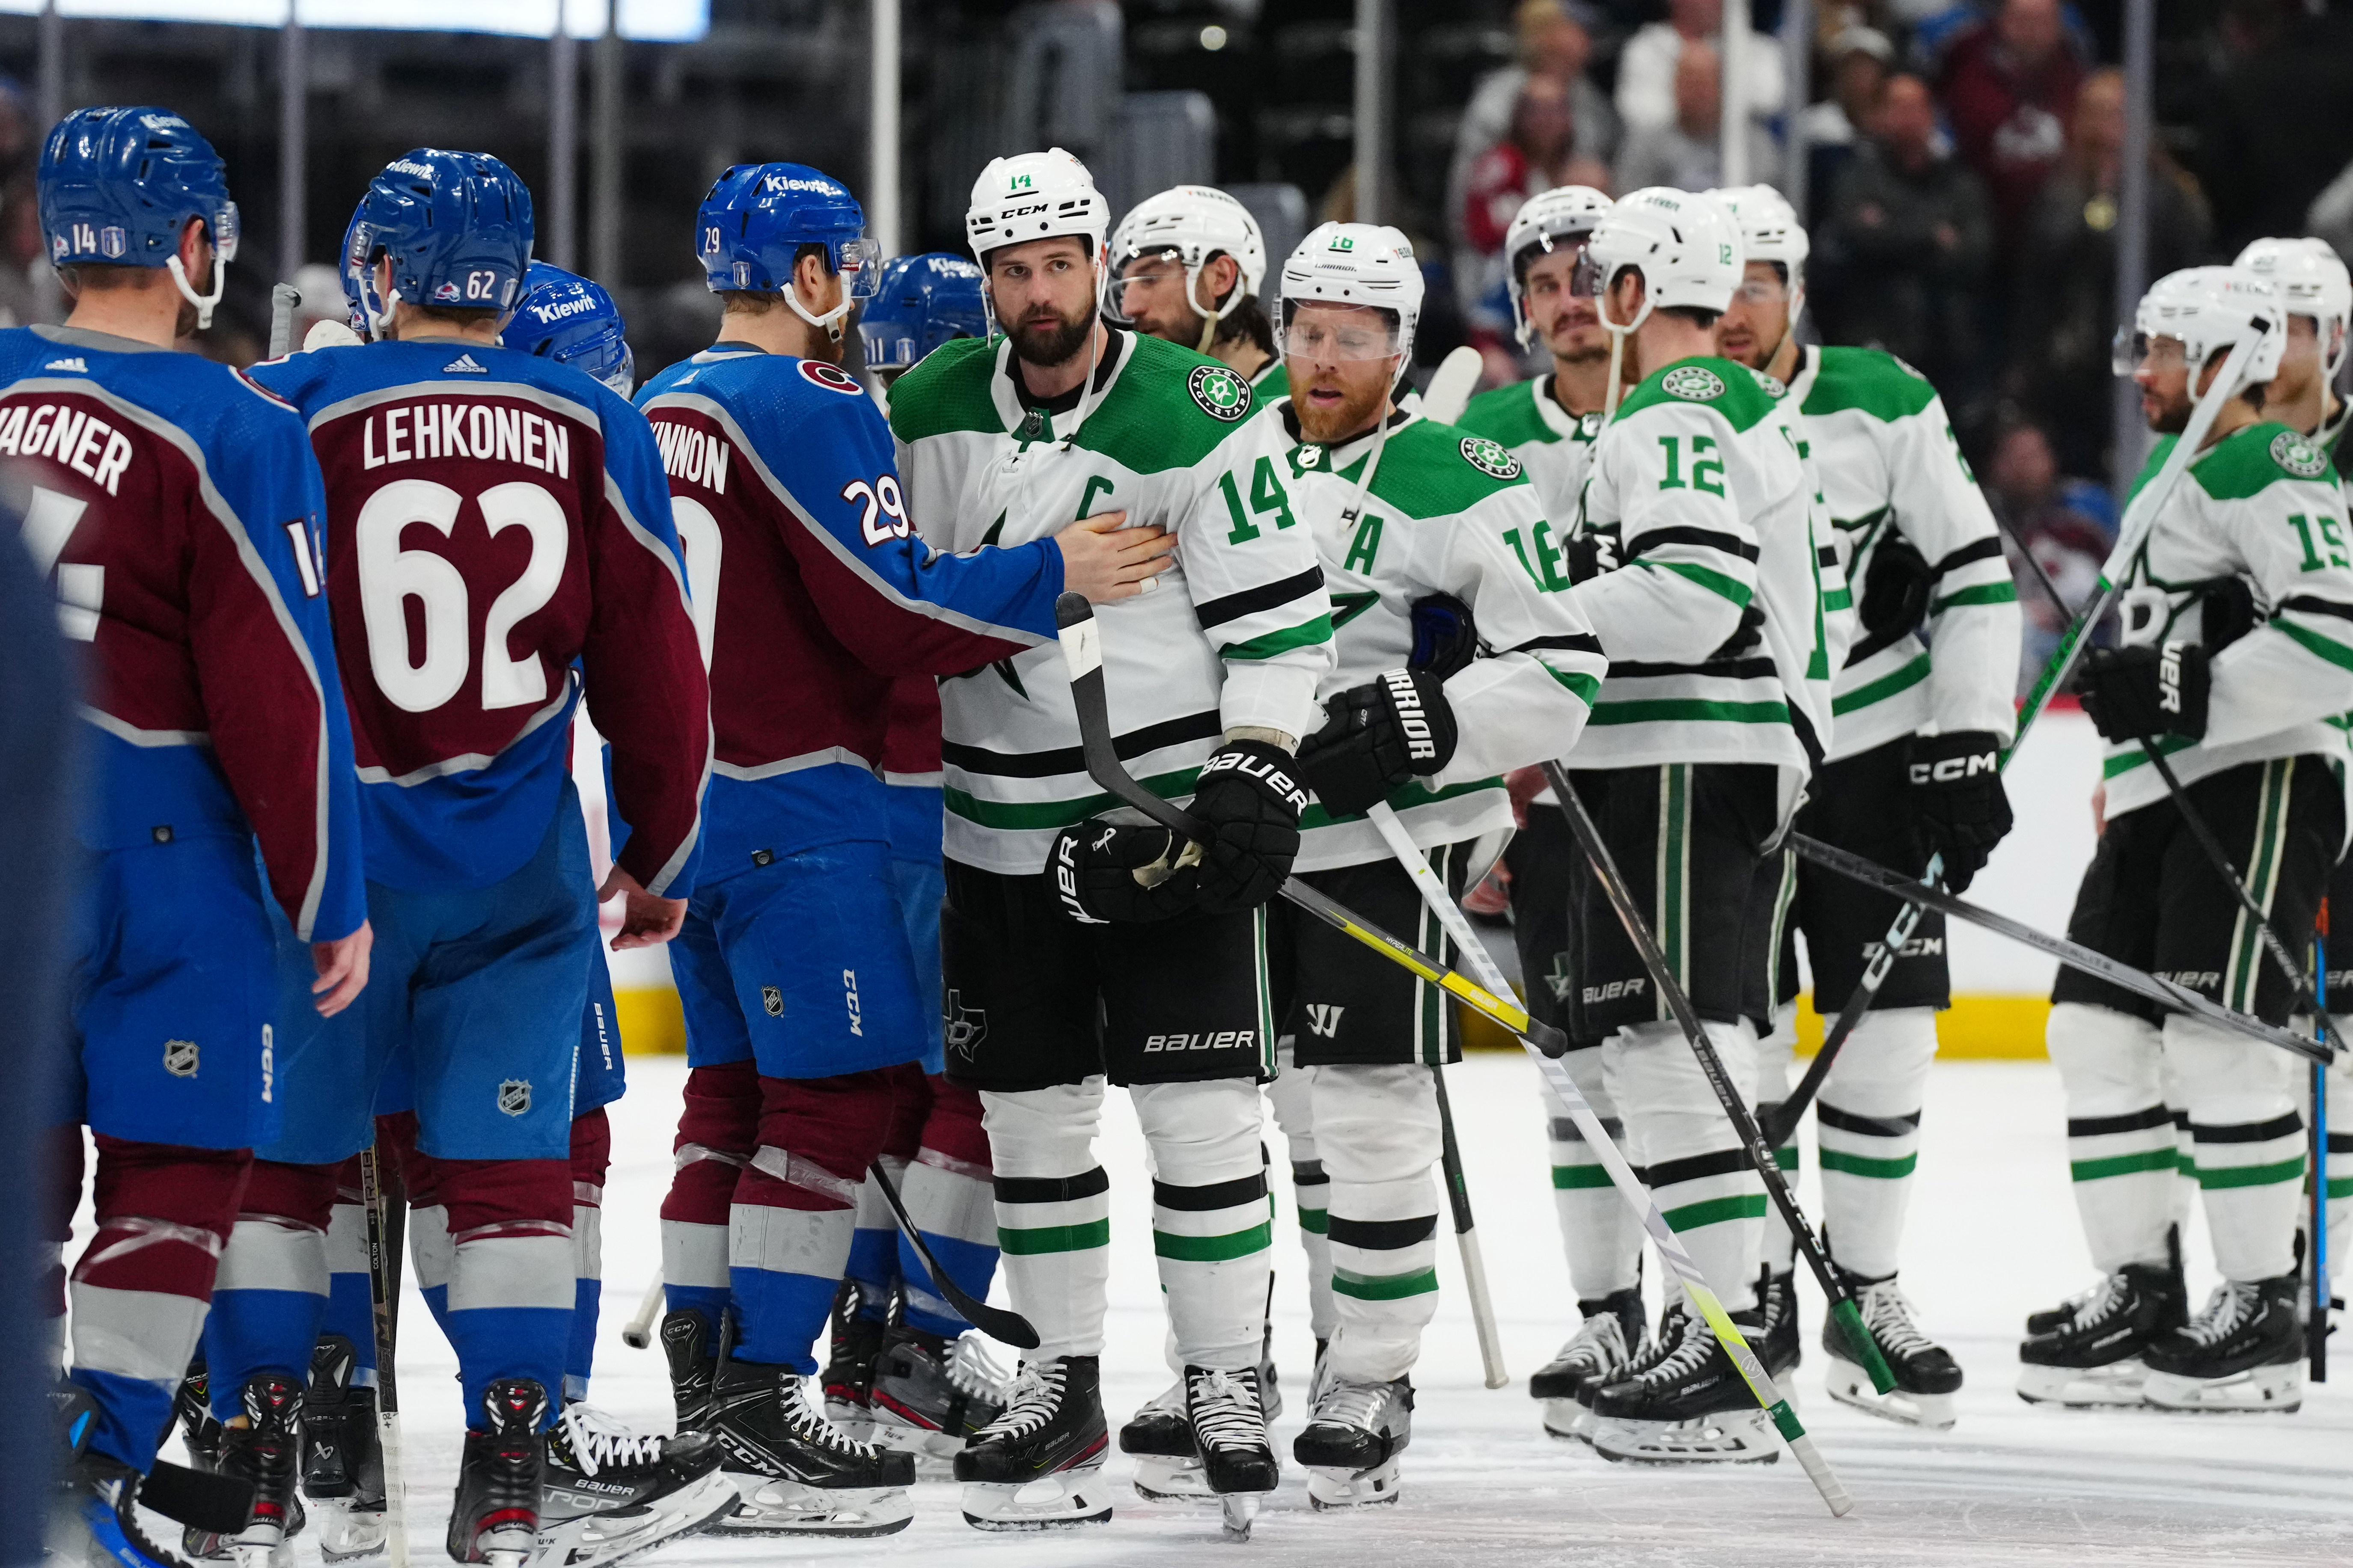 Stars vs. Canucks/Oilers schedule, results, TV info for Western